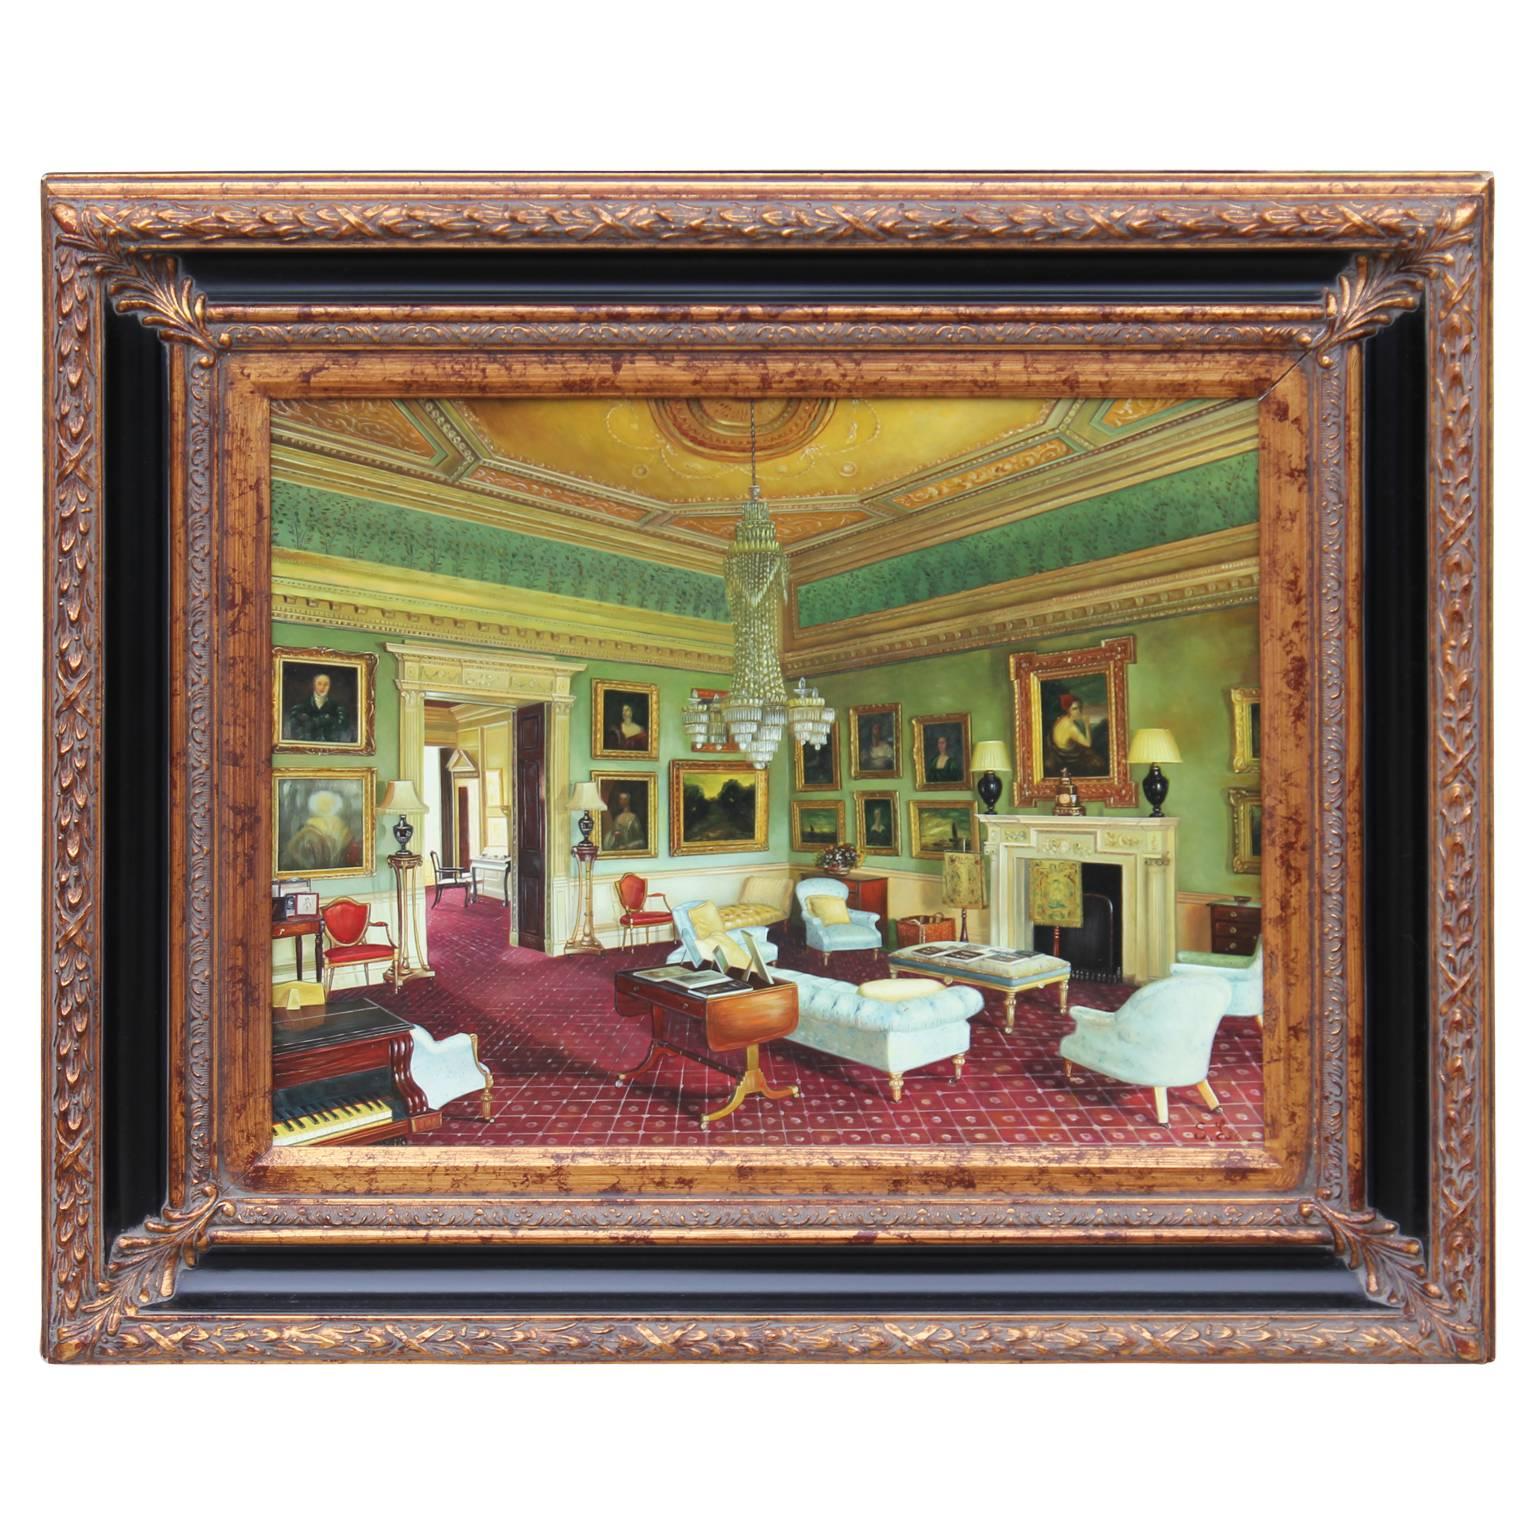 Mansion Interior Architectural Paintings by S. Lee. Multiple interior scenes available as shown in the pictures. Each painting is $1500. Please inquire with us about measurements and other information if needed. 